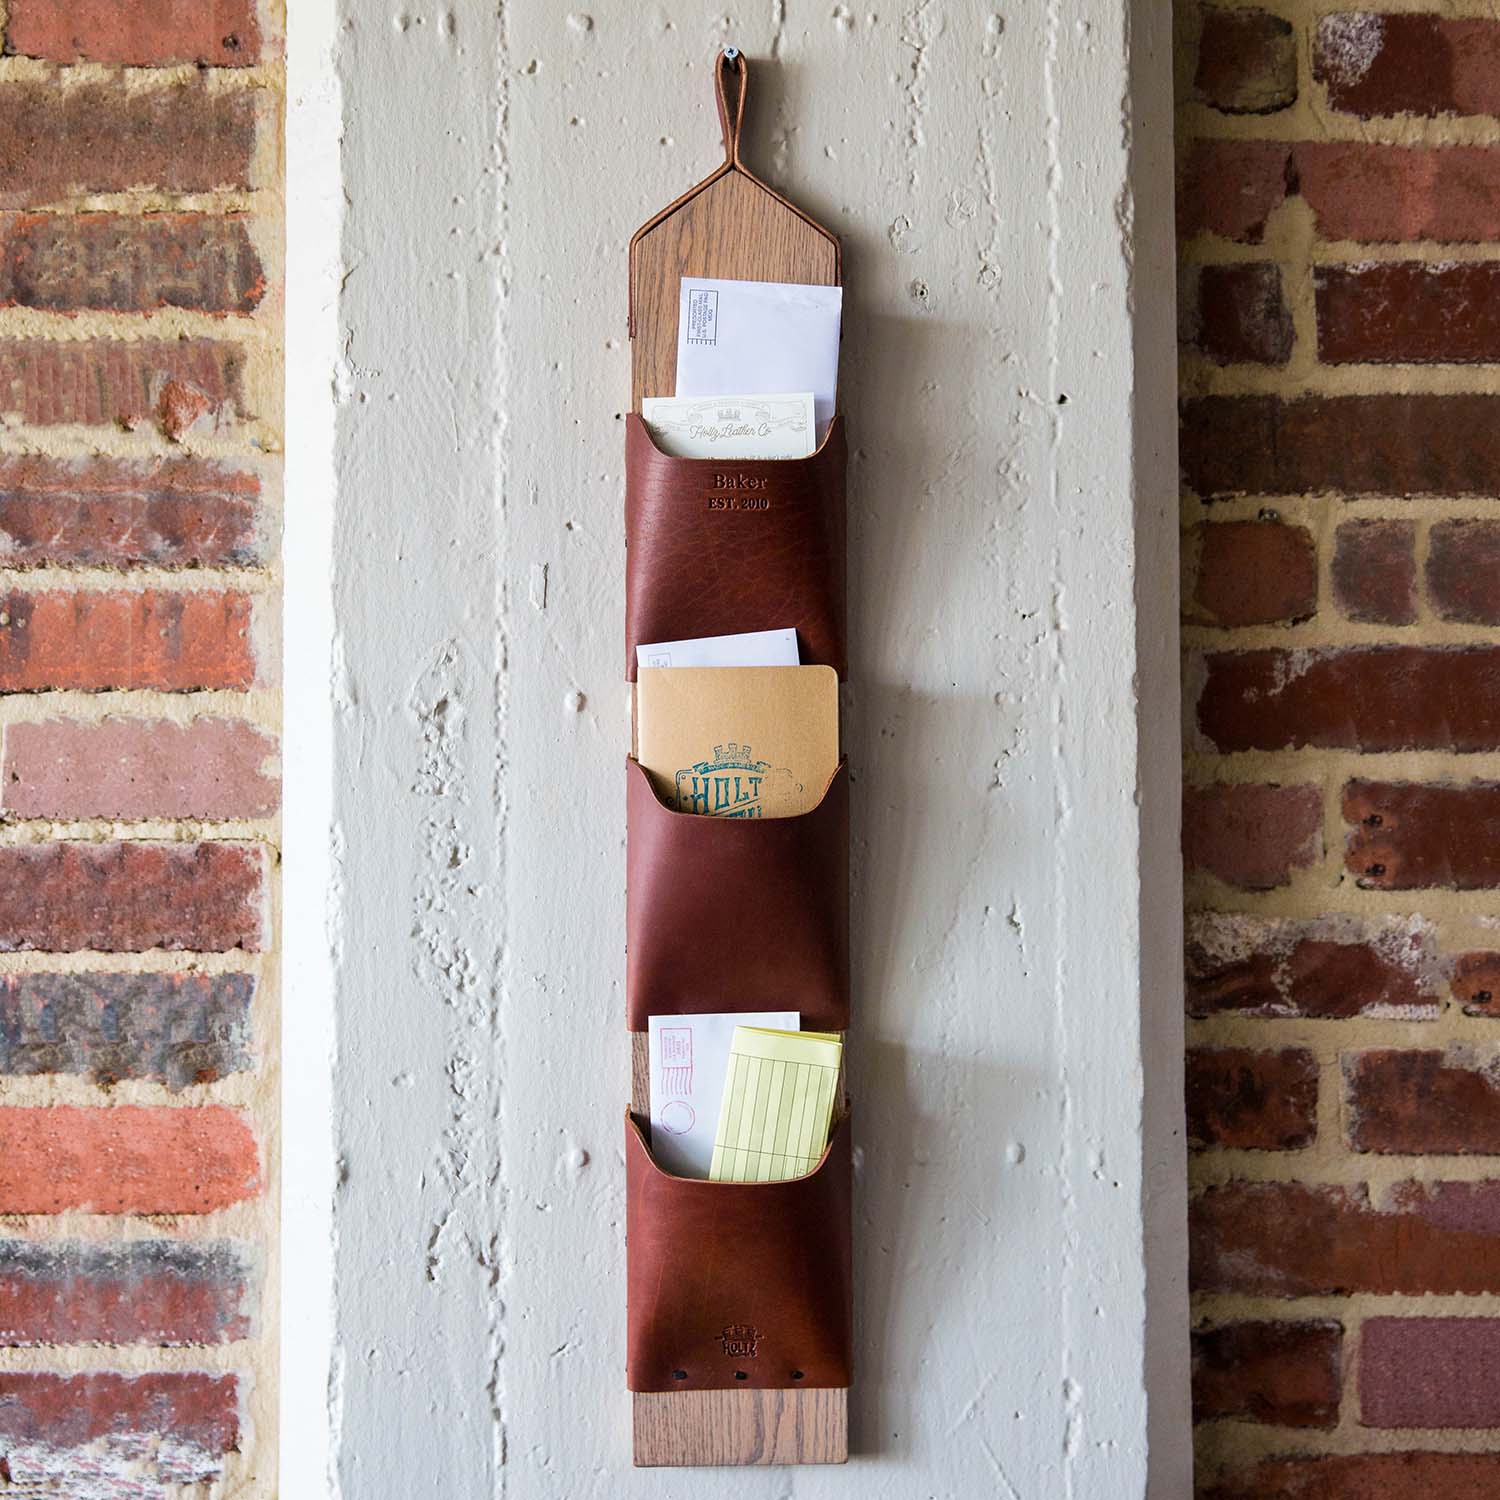 Wall mounted mail organizer and letter rack made of wood and fine American leather